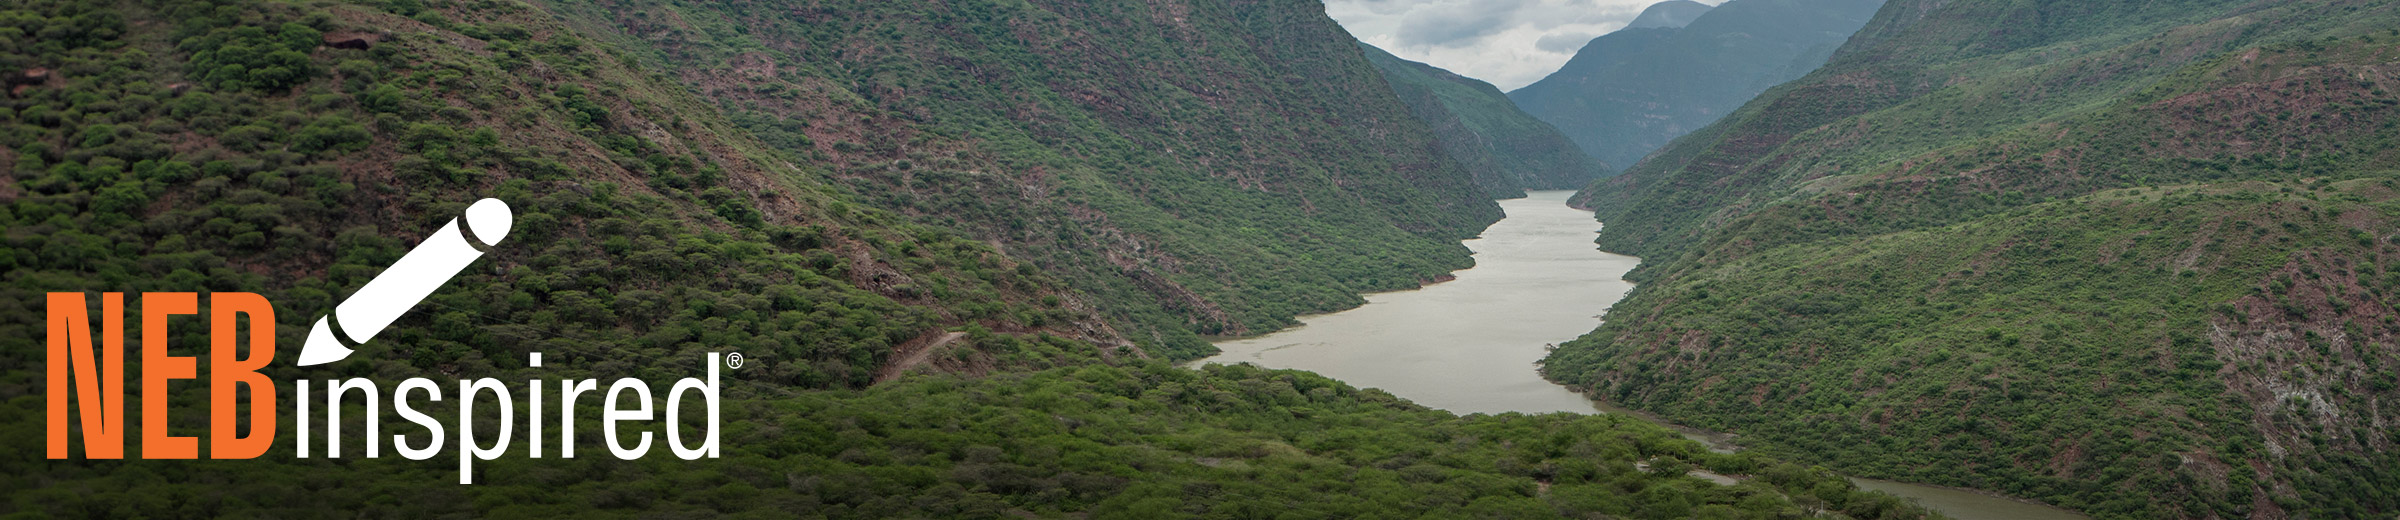 Aerial photograph of tree-covered mountains and river